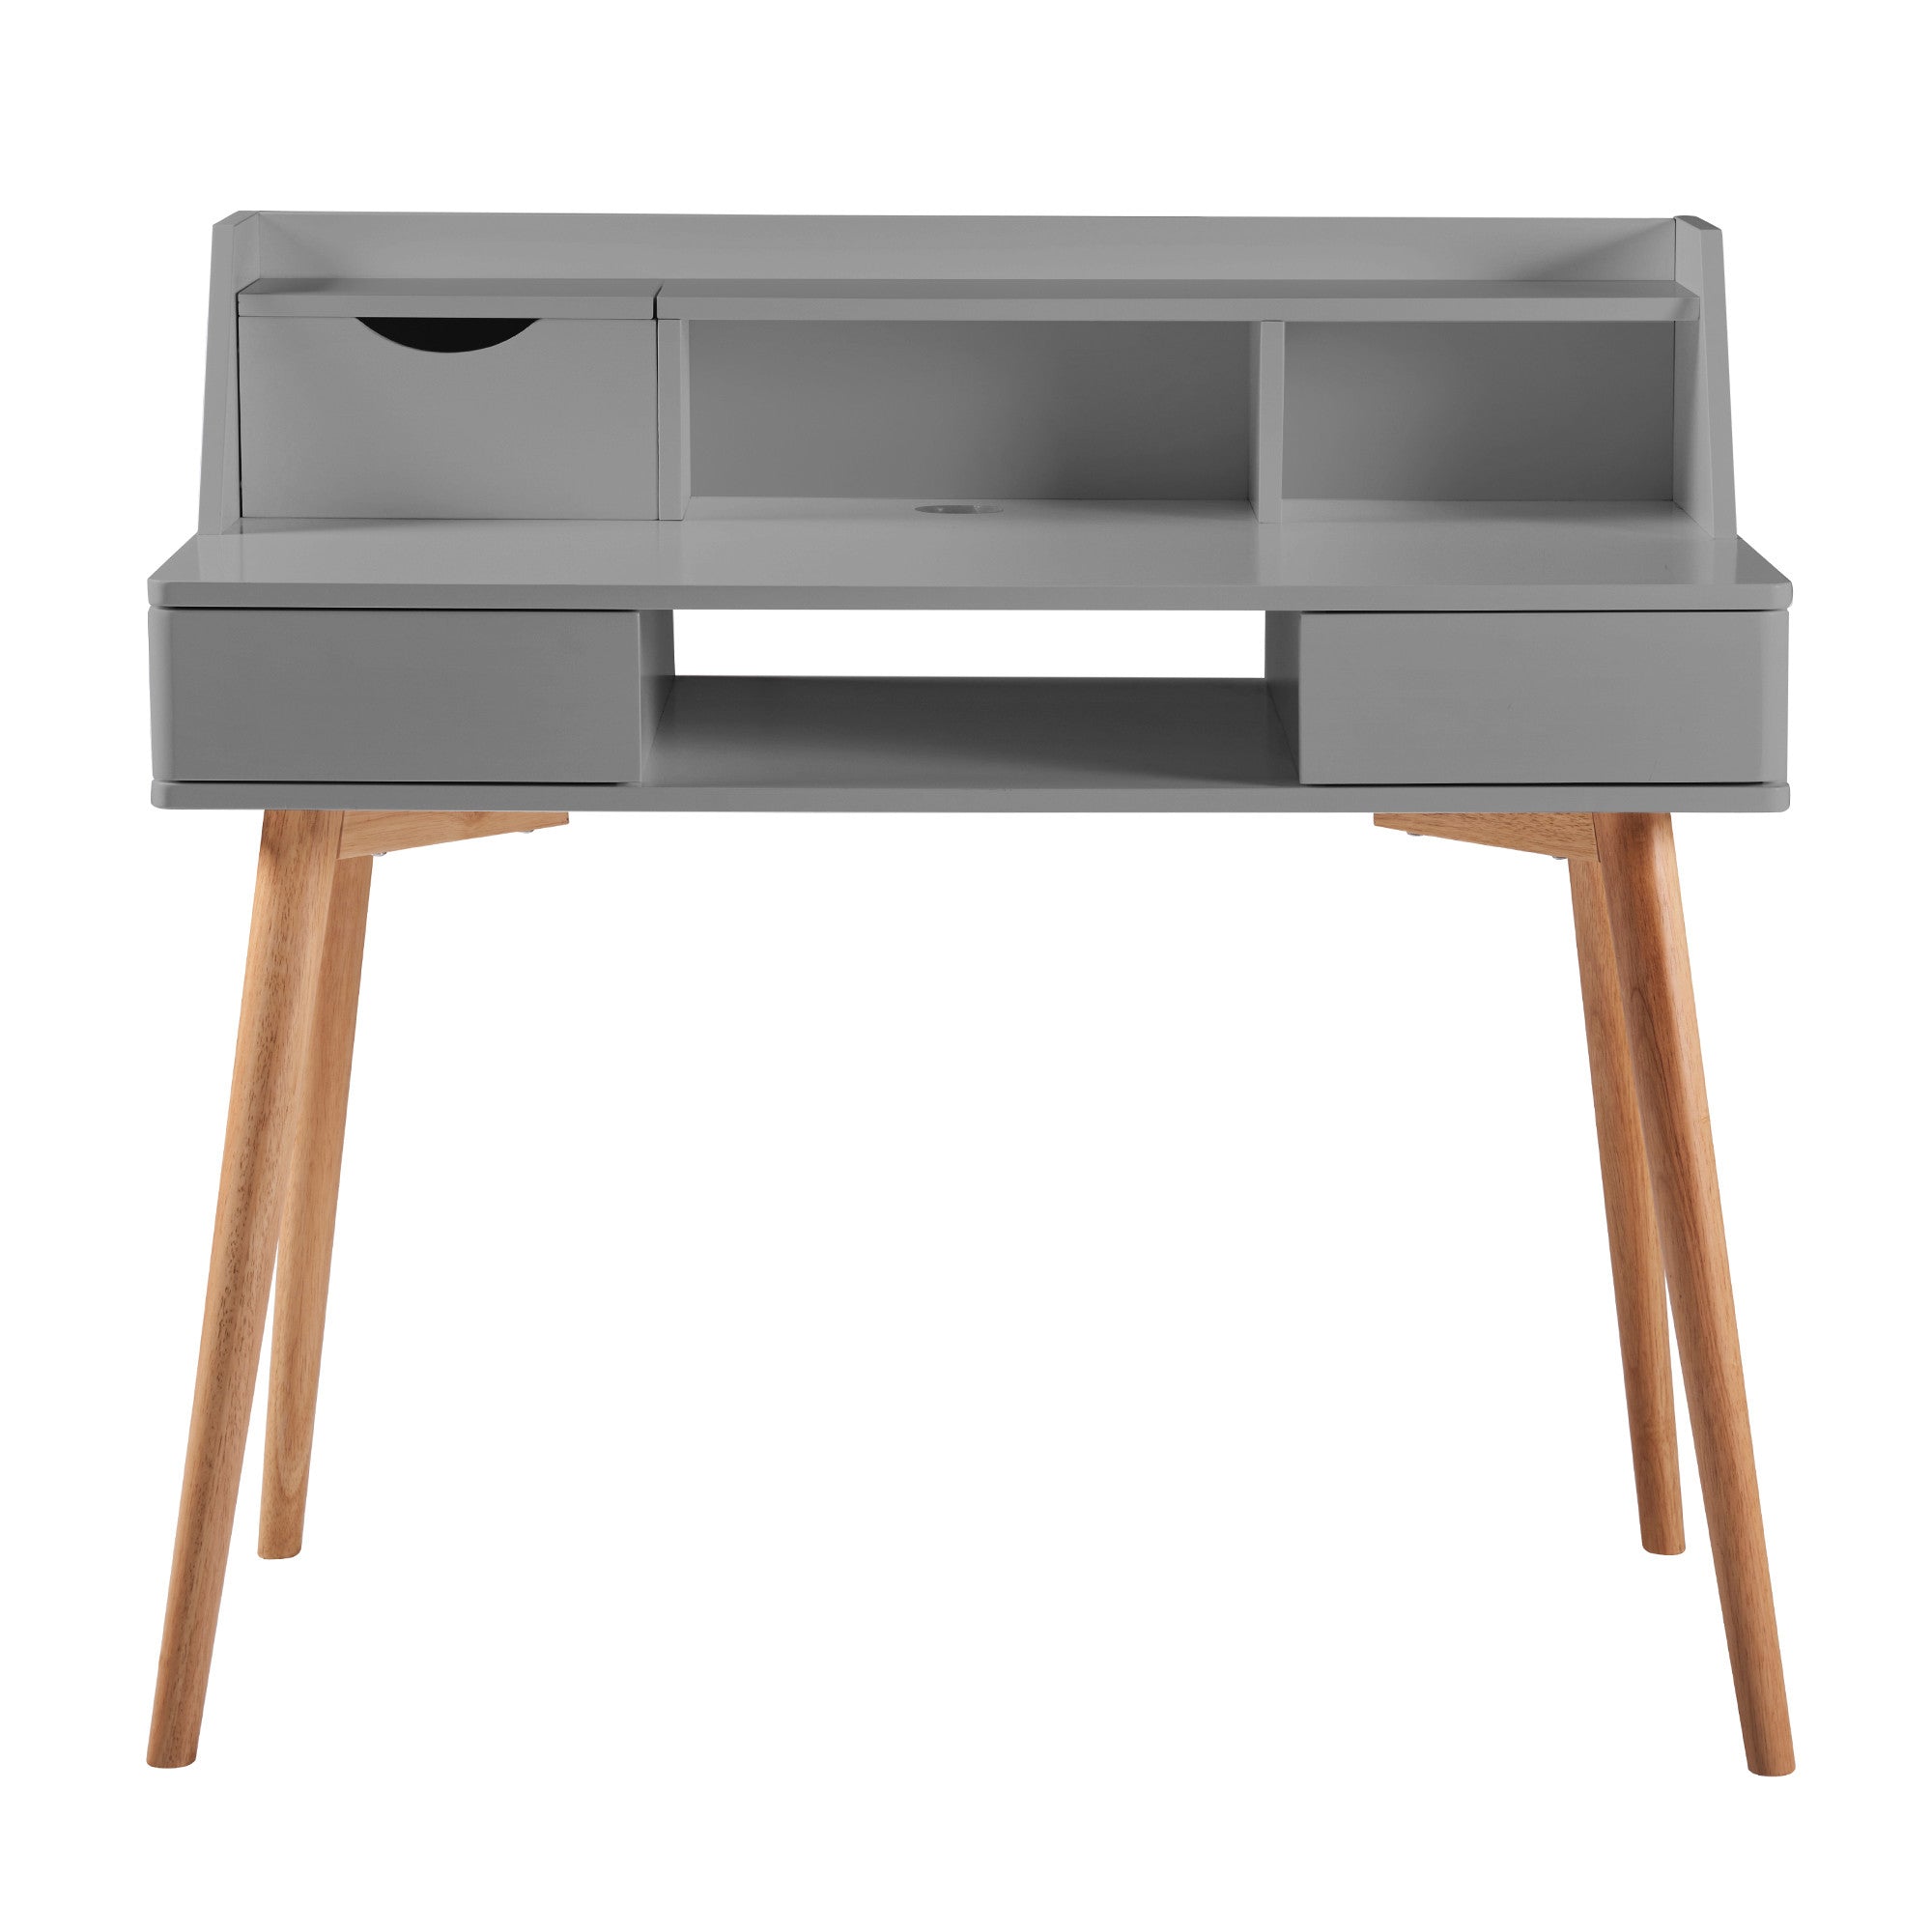 Teamson Home Creativo Wooden Writing Desk with Storage, Light Gray/Natural